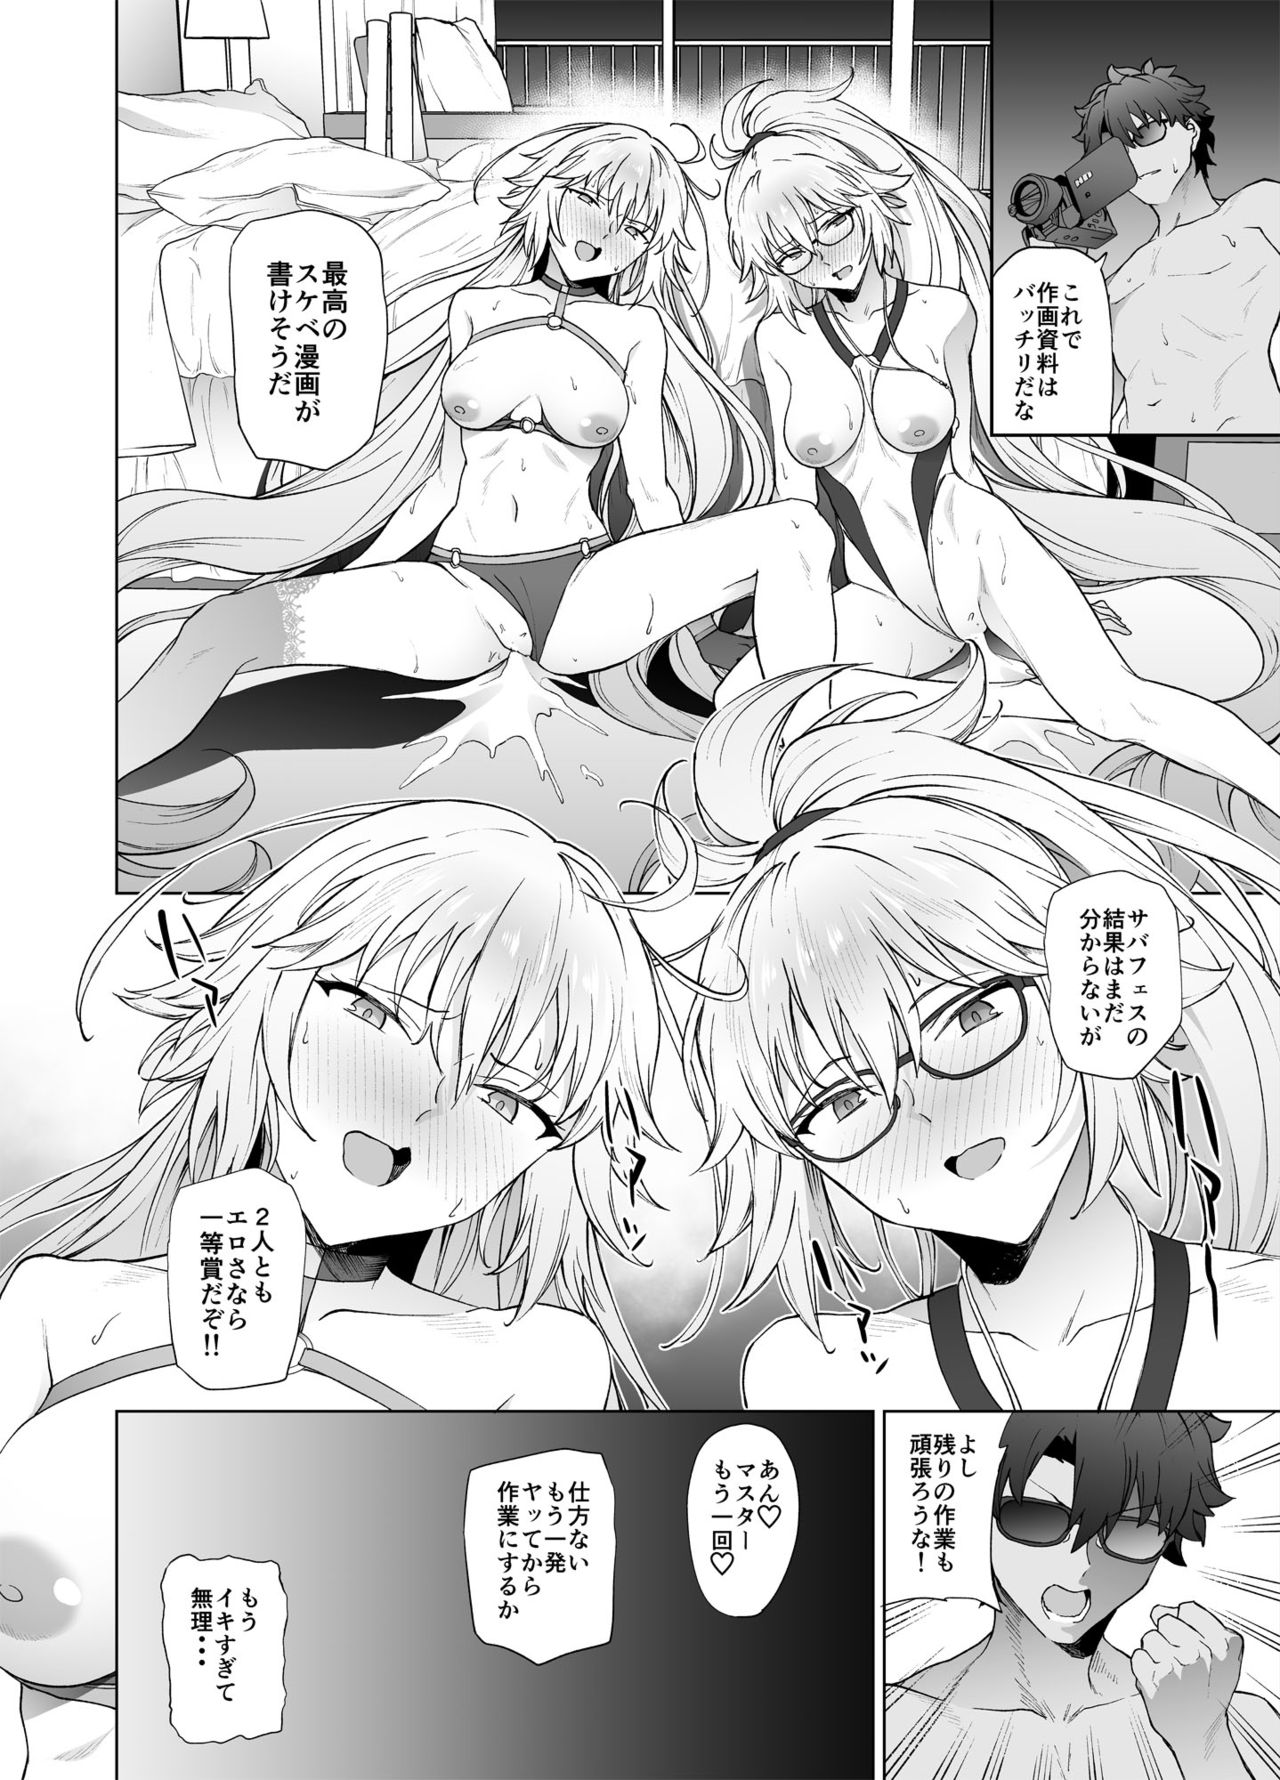 [EXTENDED PART (Endo Yoshiki)] Jeanne W (Fate/Grand Order) [Digital] page 35 full